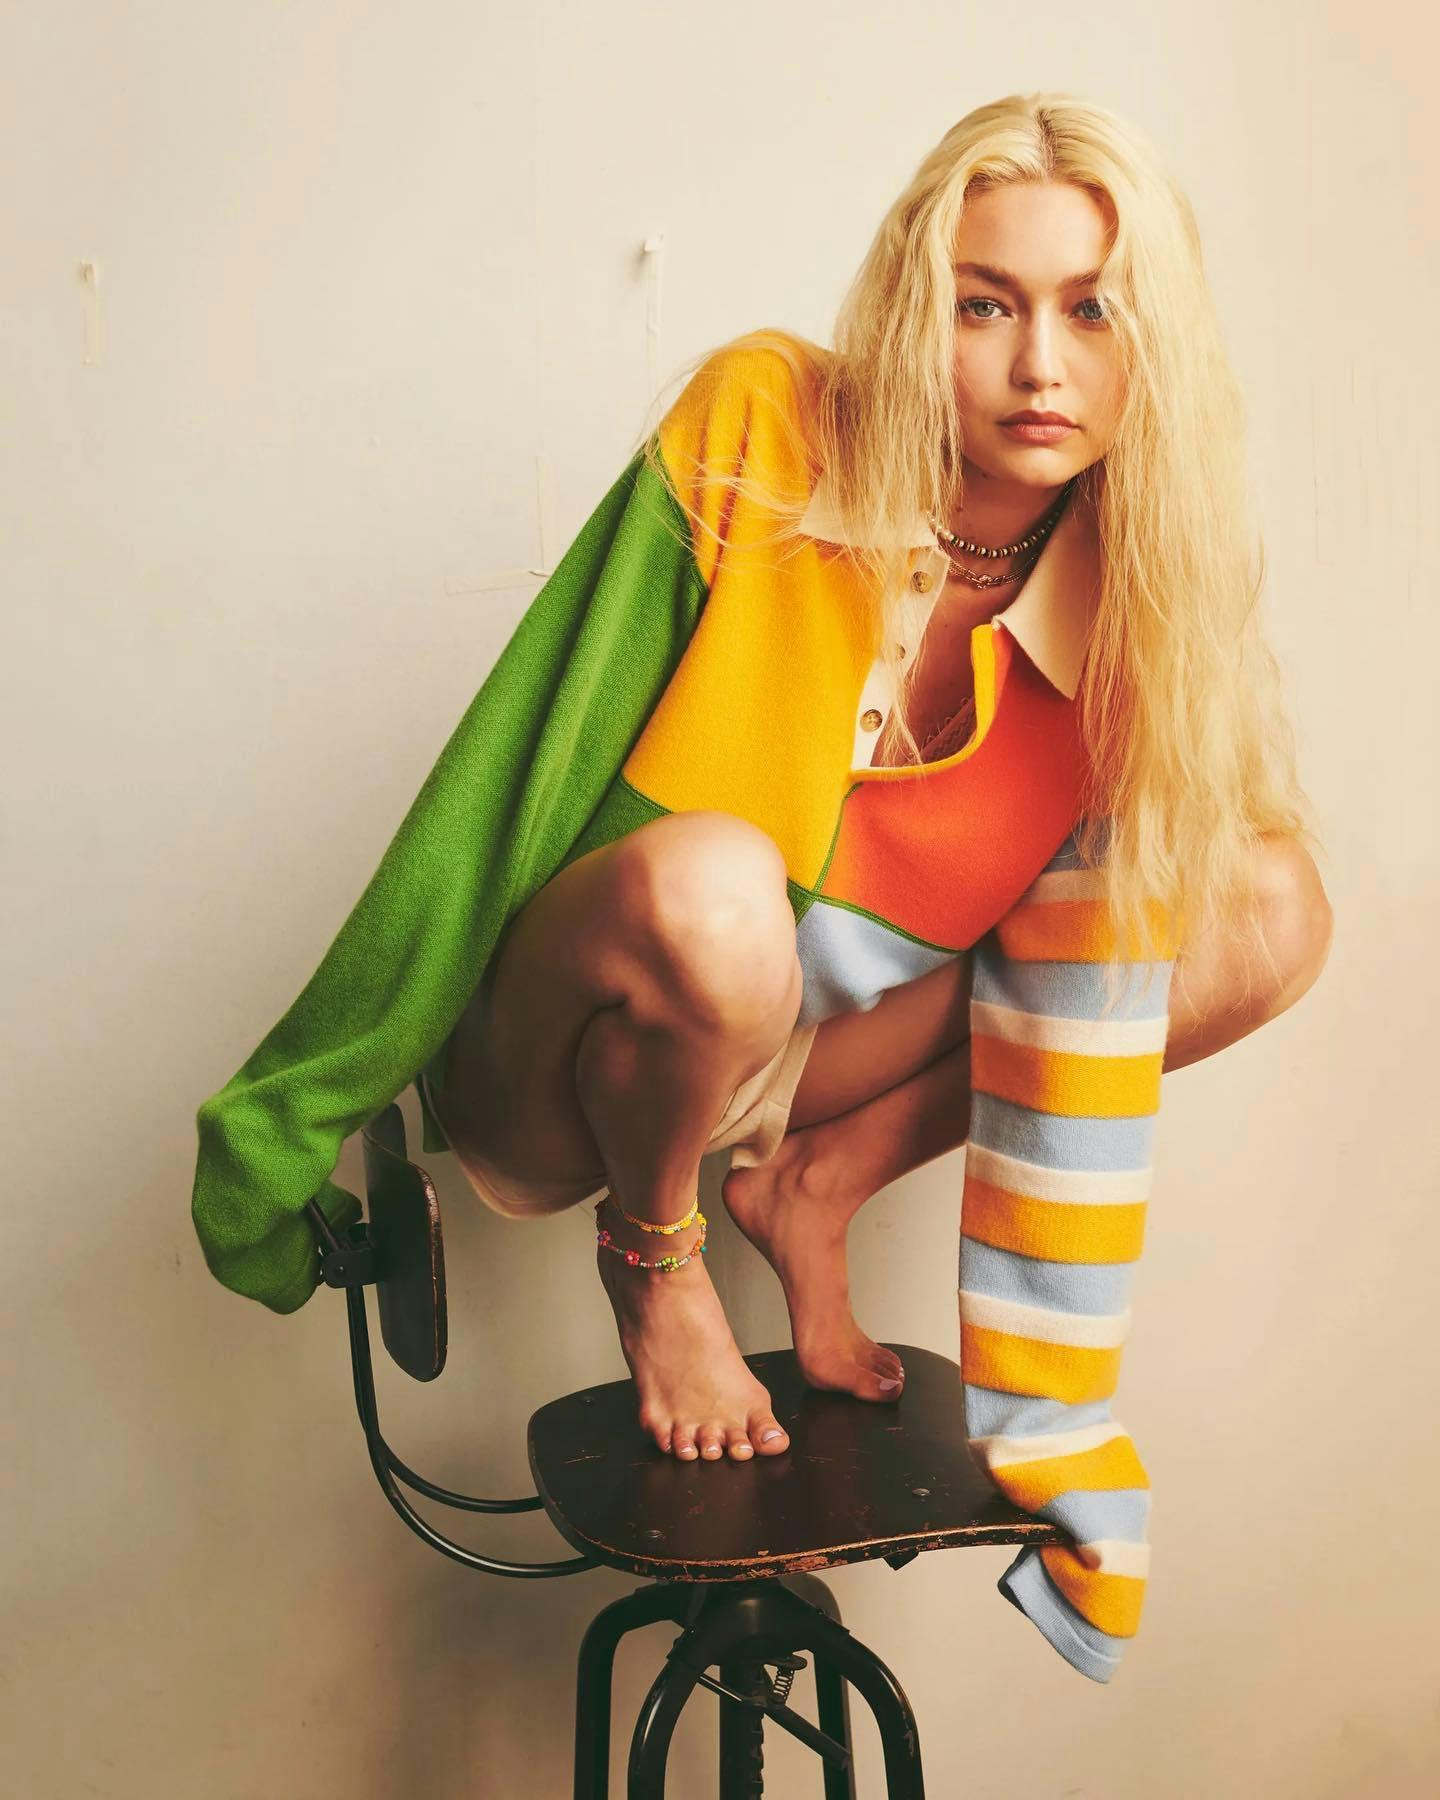 Woman crouching on chair in colorful sweater.